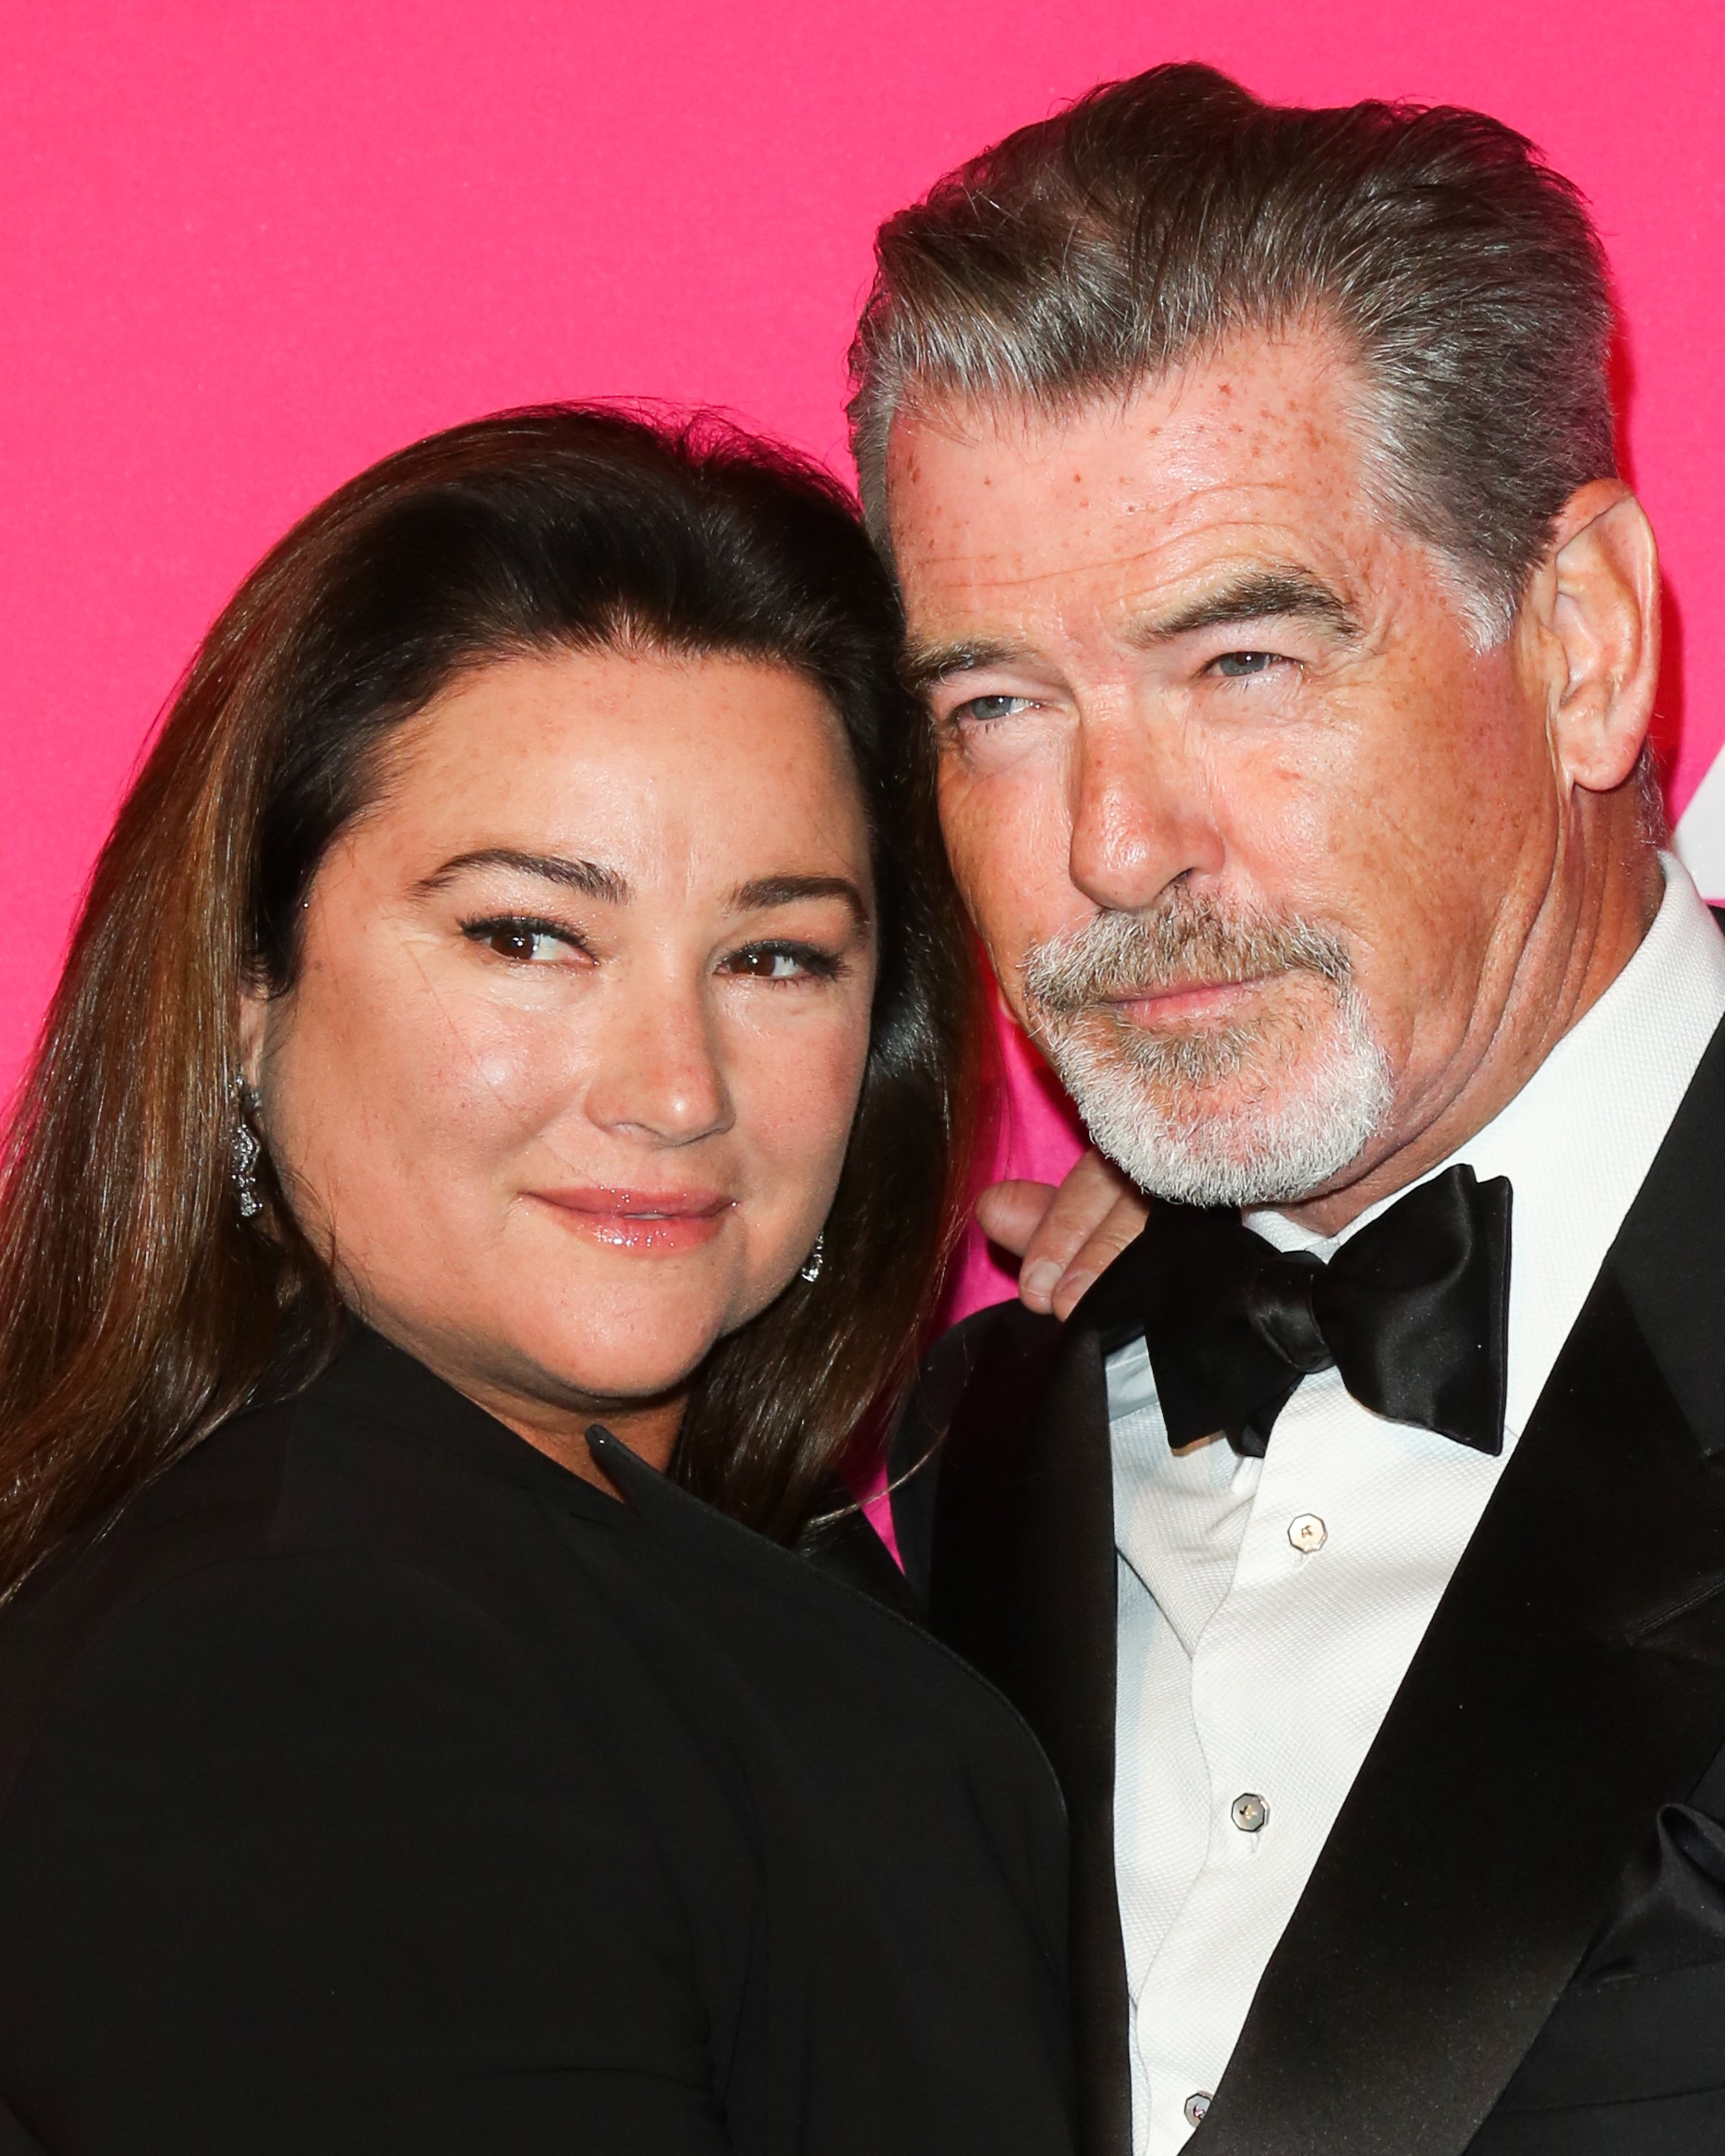 Pierce Brosnan and Keely Shaye Smith attend the MOCA Gala 2017 at The Geffen Contemporary at MOCA on April 29, 2017, in Los Angeles, California. | Source: Getty Images